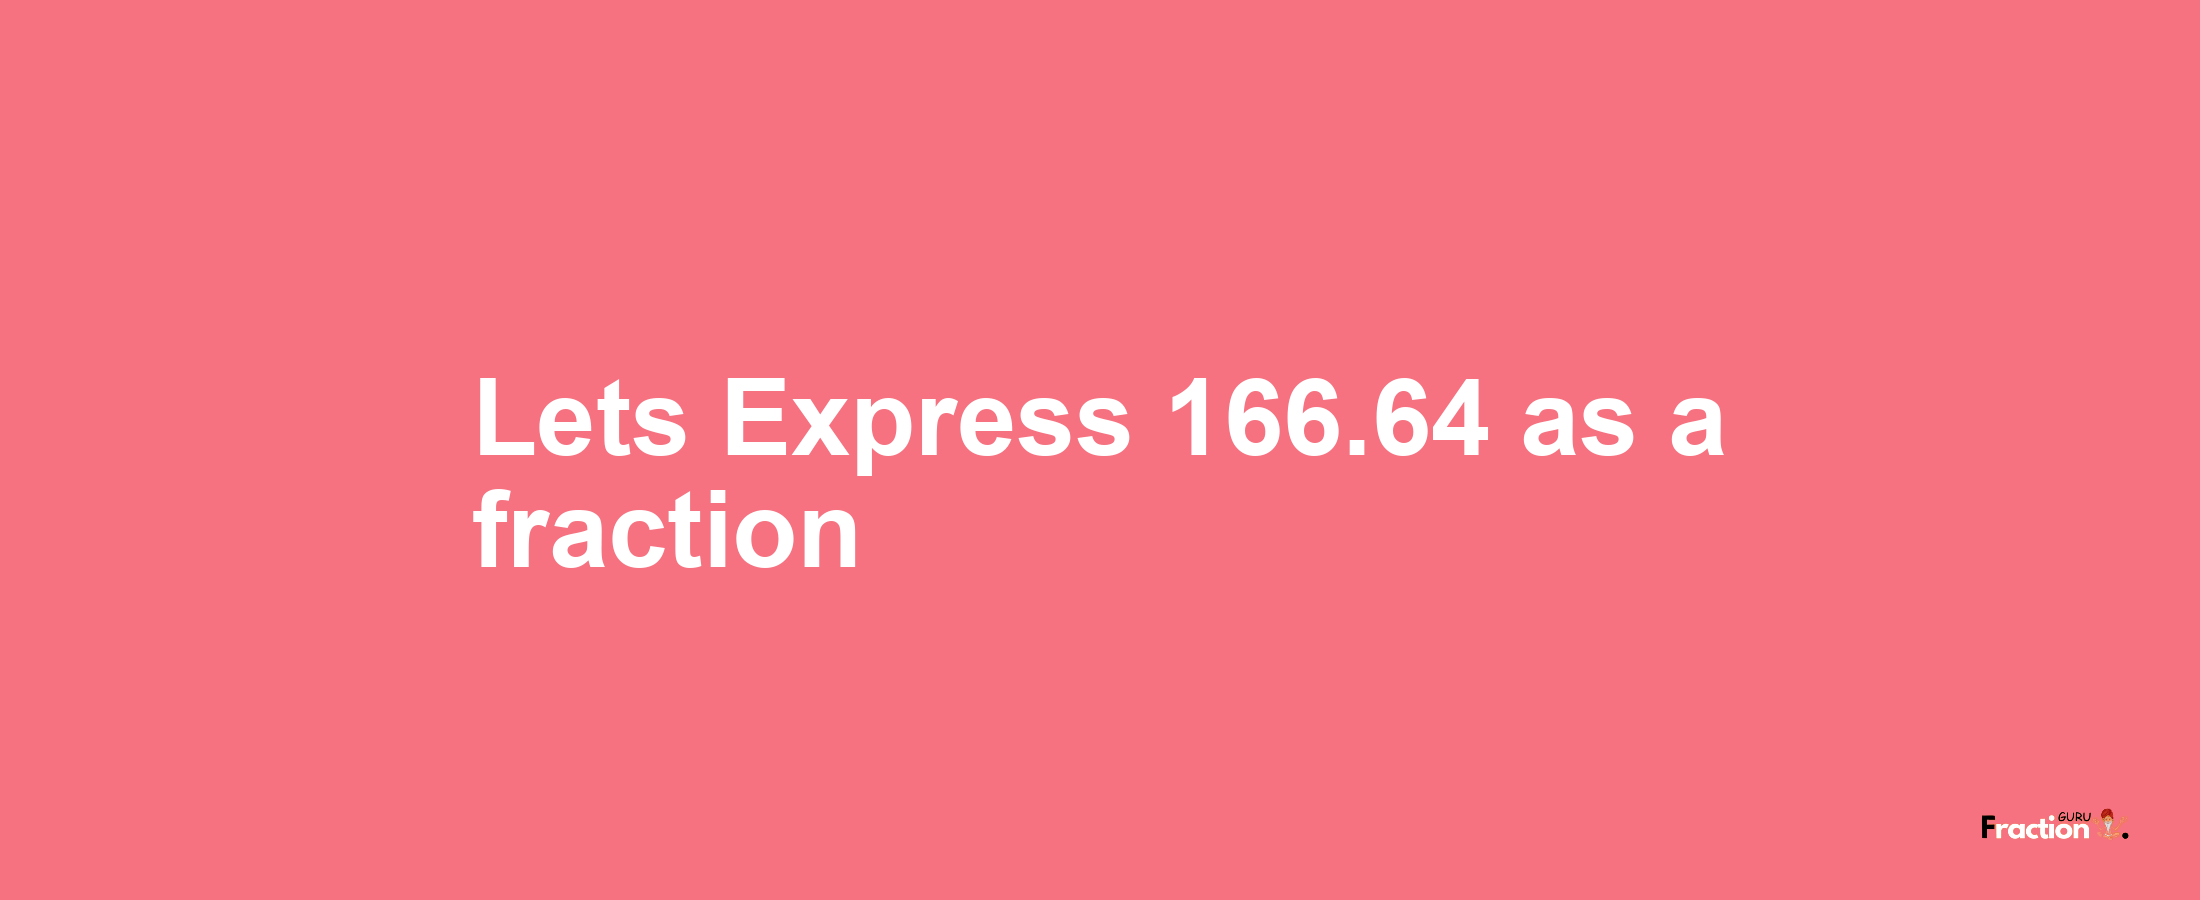 Lets Express 166.64 as afraction